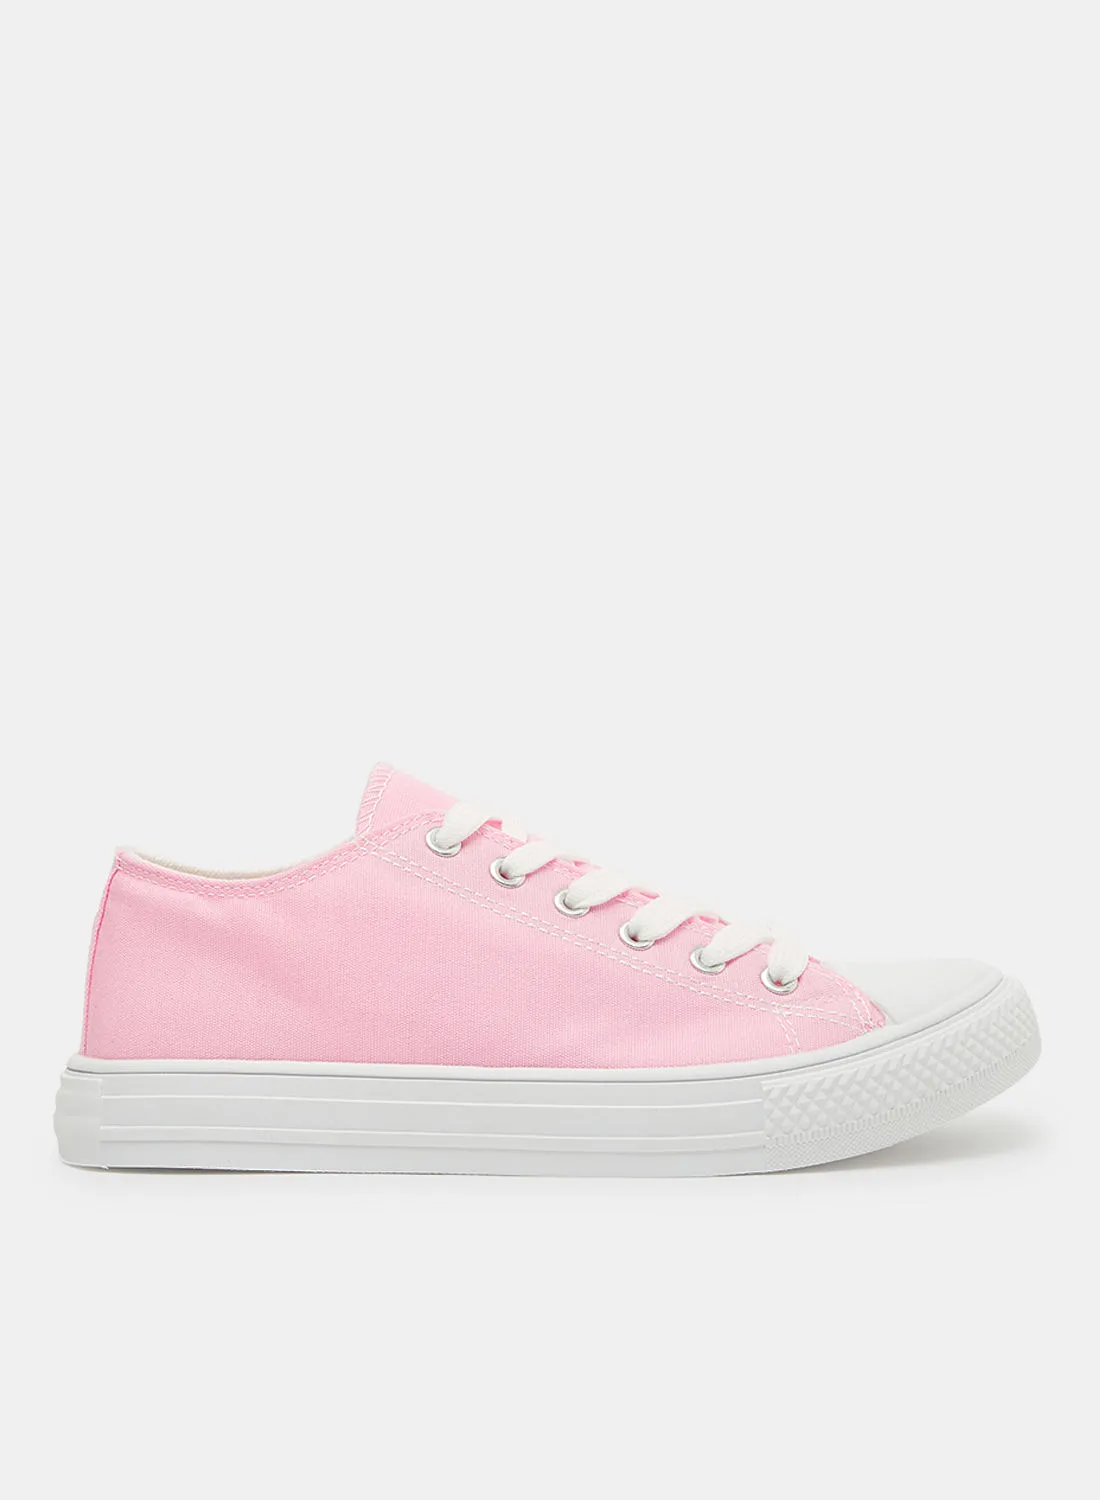 LABEL RAIL Canvas Low Top Sneakers Pink